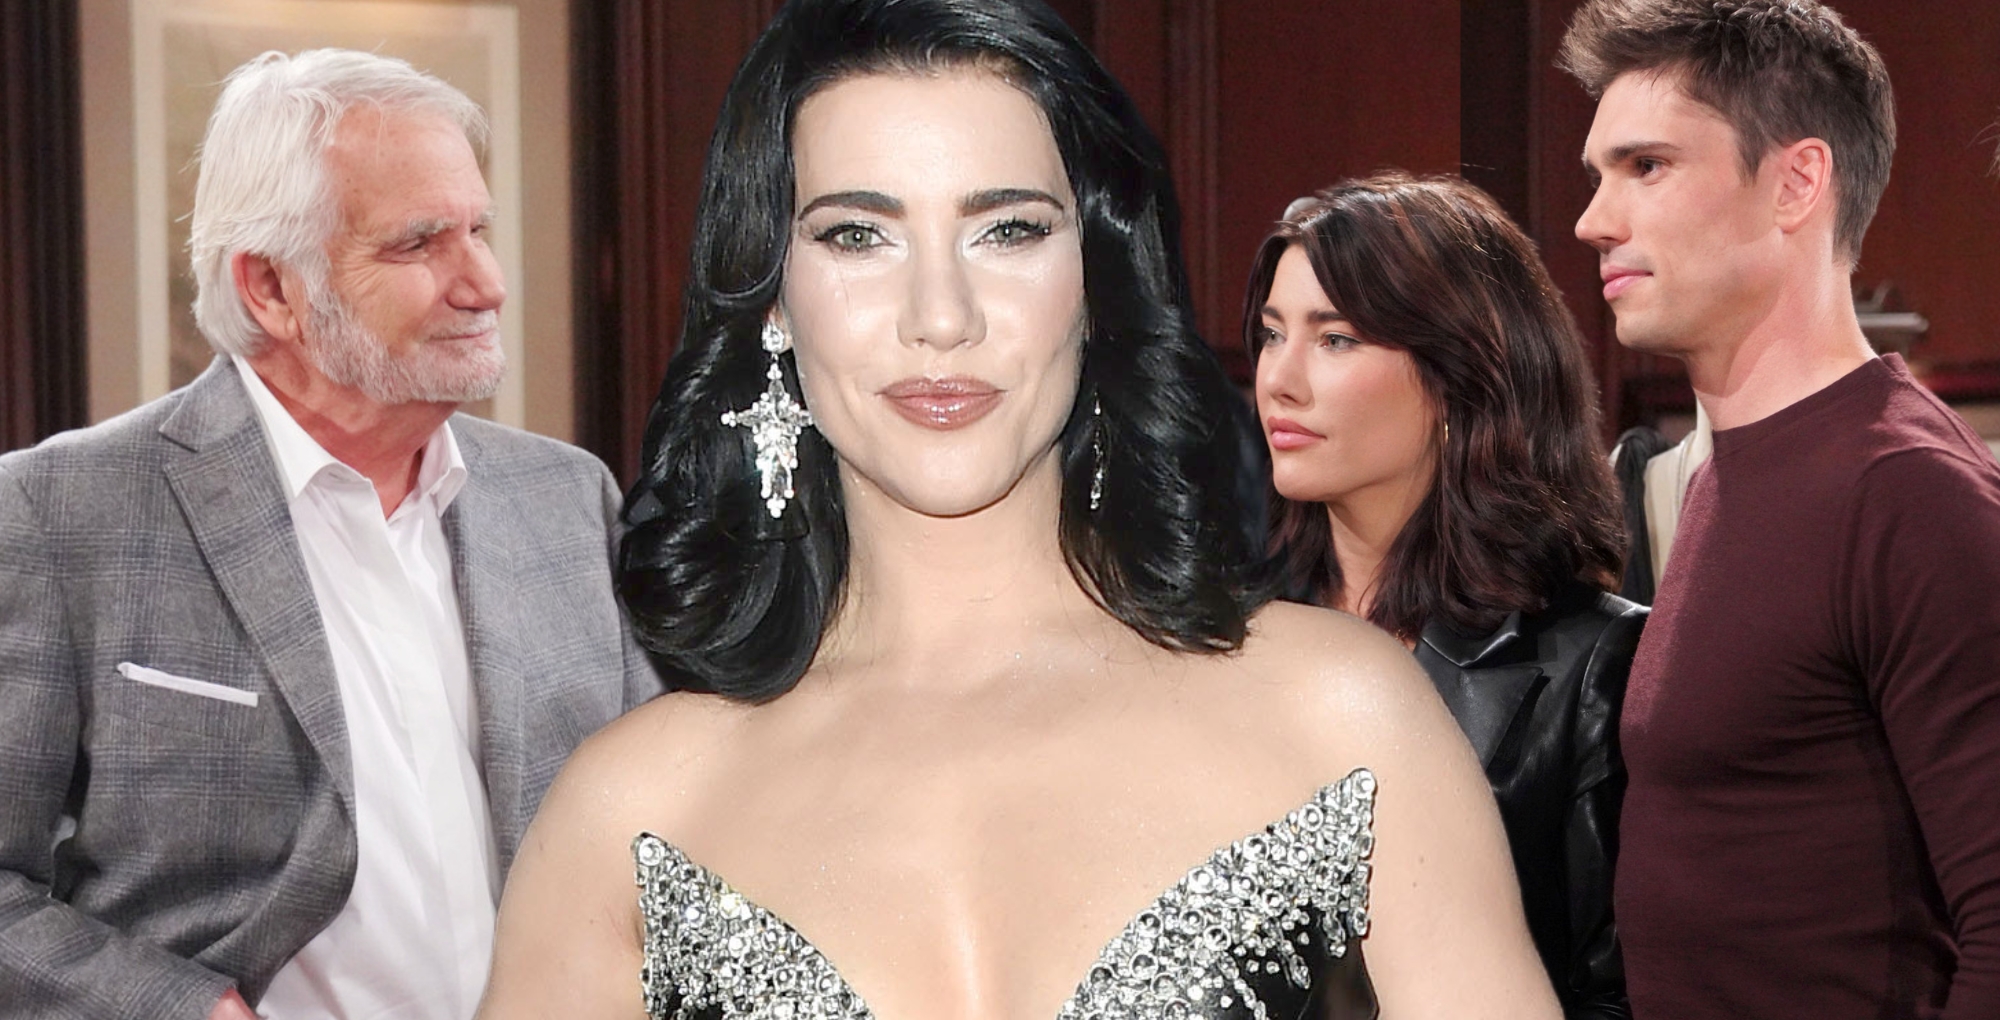 the bold and the beautiful star jacqueline macinnes wood shares predictions for eric forrester, steffy forrester, and finn finnegan.